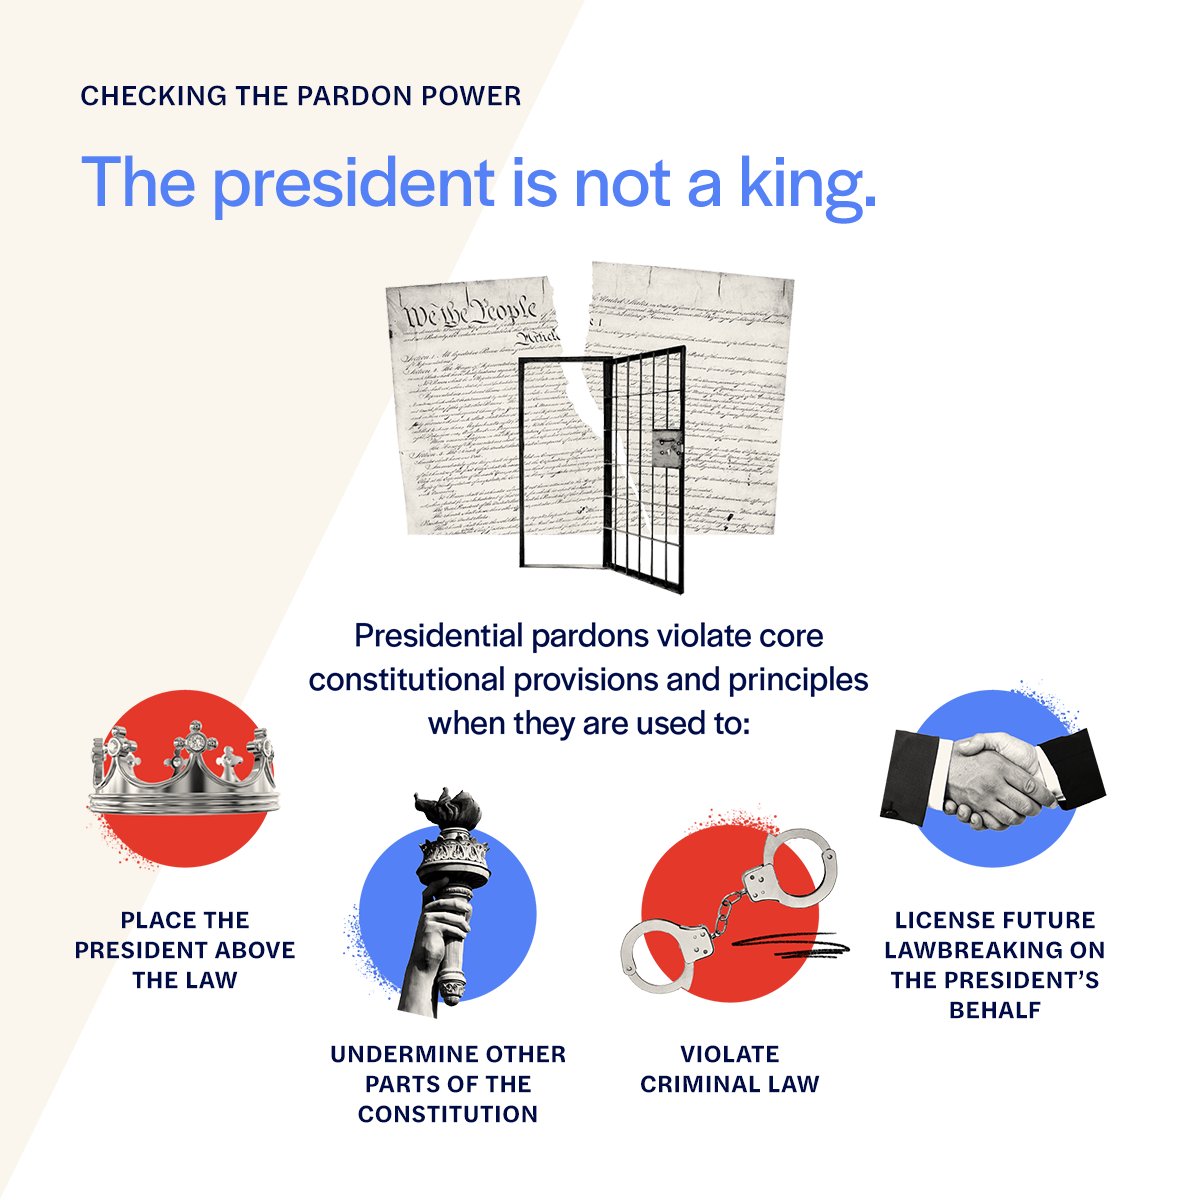 As examined in our report, the pardon power may be abused in at least four distinct ways: